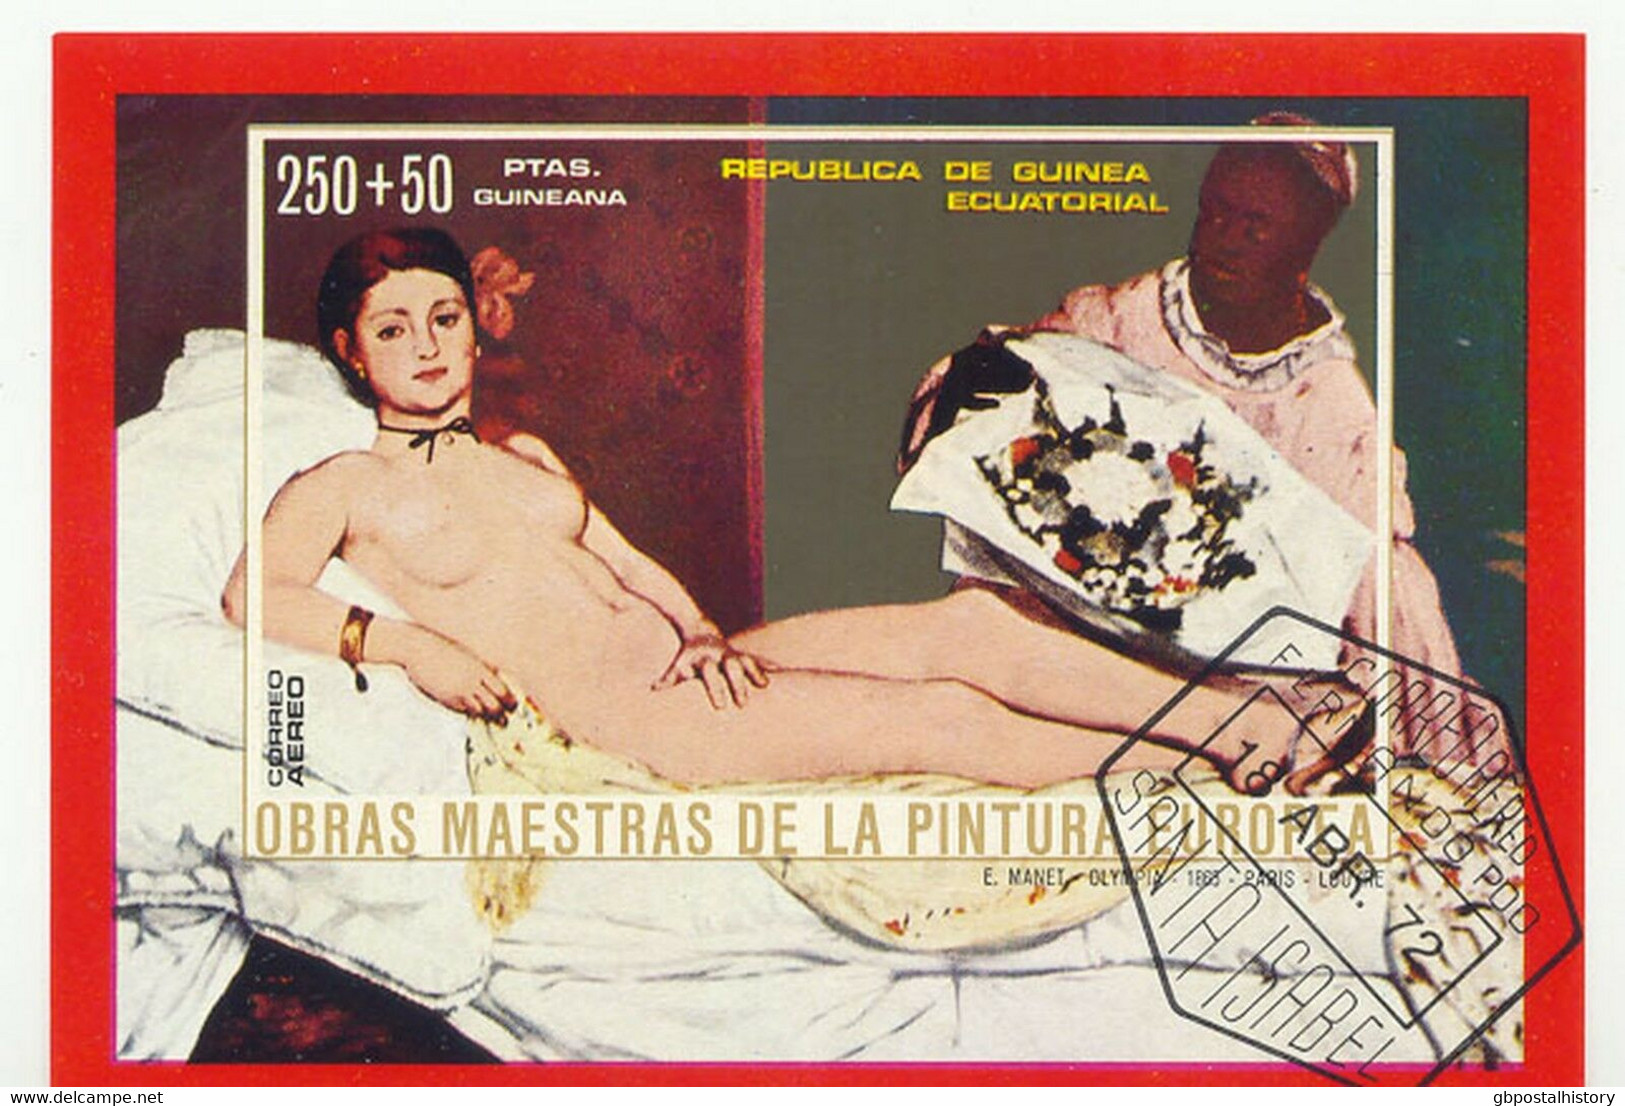 EQUATORIAL GUINEA 1972 Nude Painting By P. Manet 250+50 Ptas. IMPERFORATED Superb Used M/S ERROR/VARIETY Kissed Backside - Äquatorial-Guinea